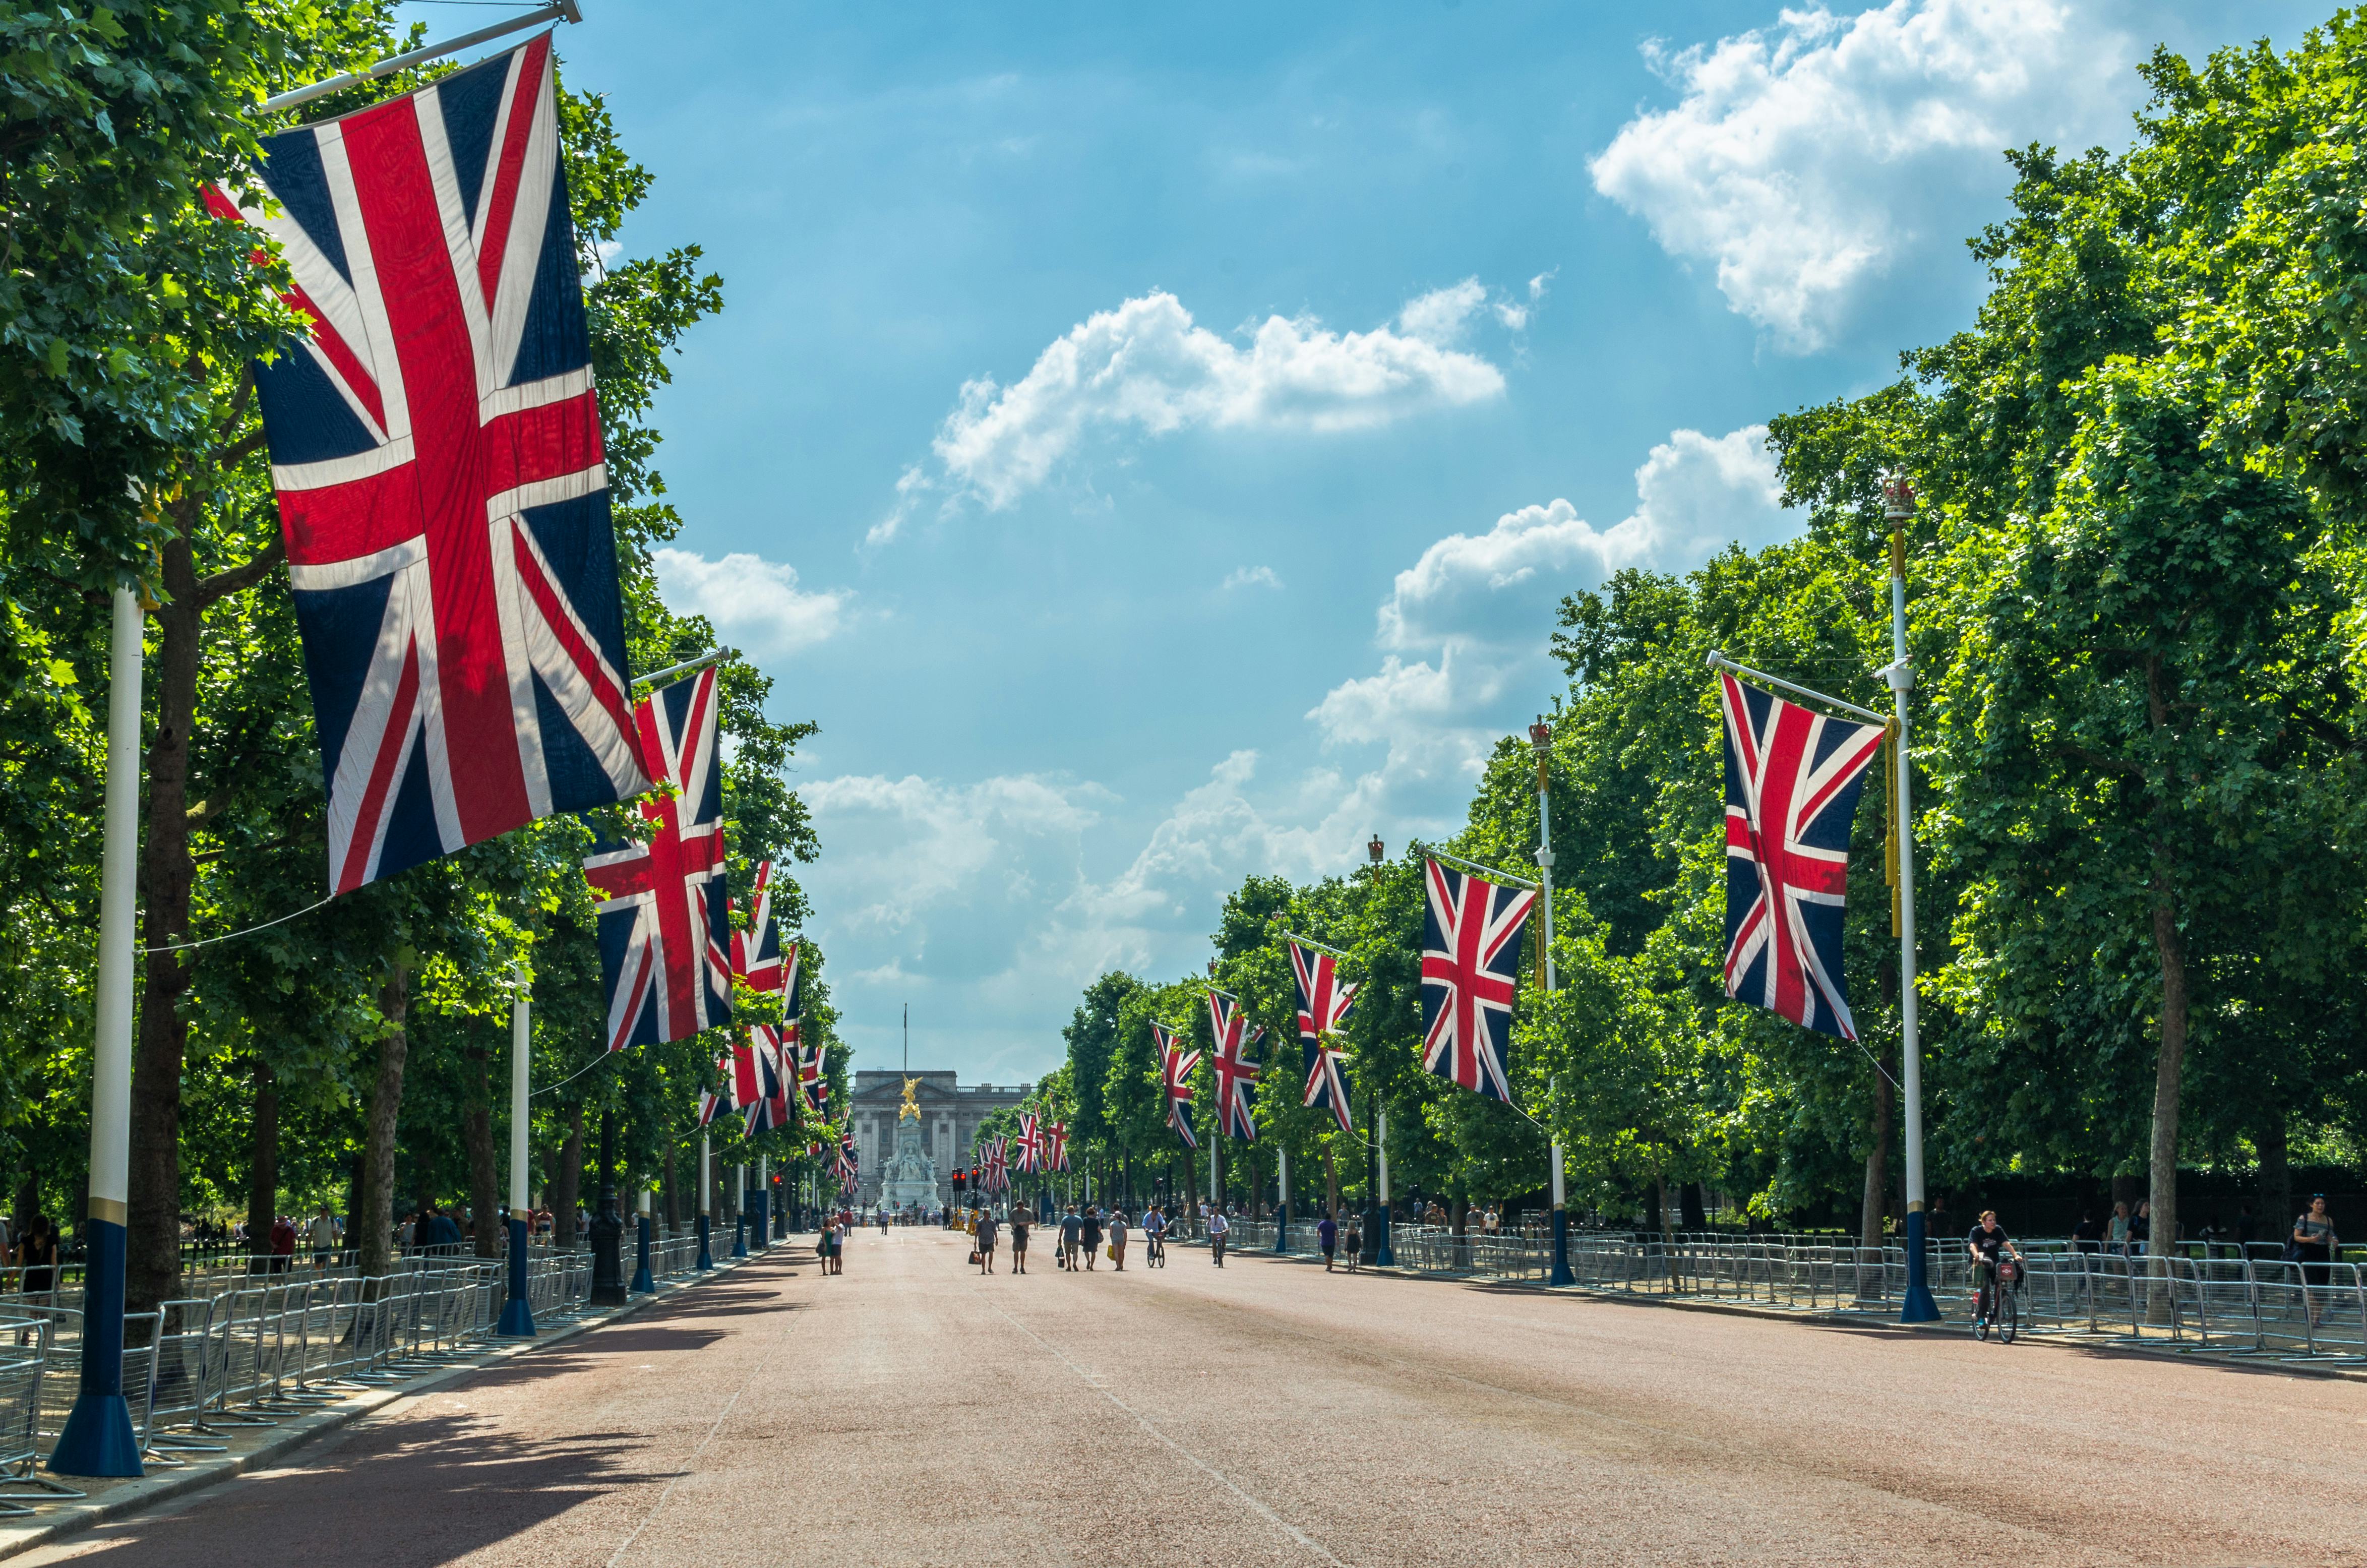 British flags hanging from flag poles on The Mall in London heading towards Buckingham Palace.